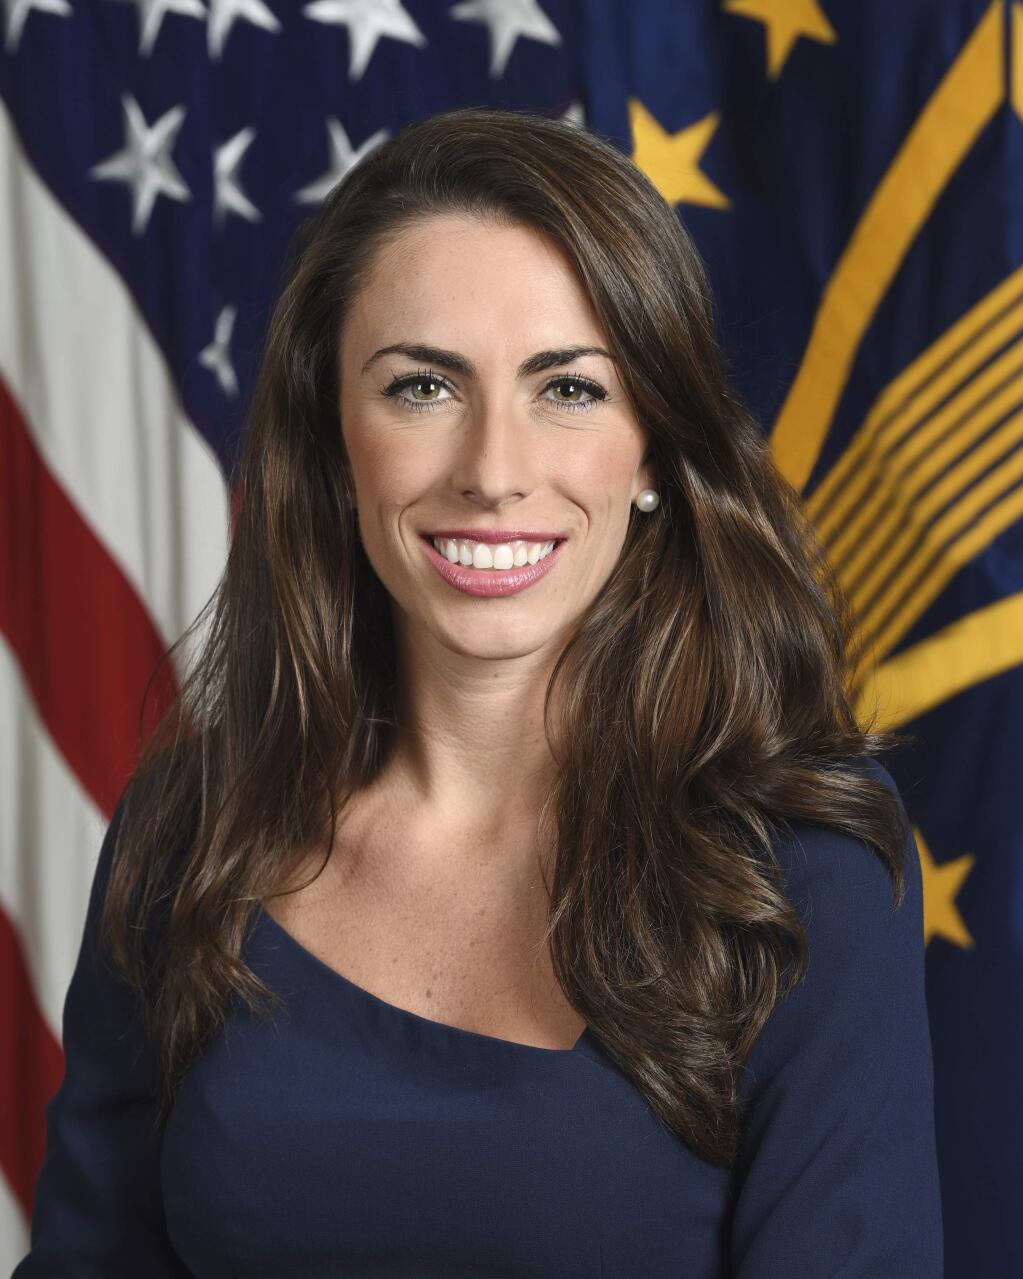 This Sept. 2019 official portrait provided by the U.S. Army shows Department of Defense Press Secretary Alyssa Farah, at the Pentagon in Washington. (Monica King, U.S. Army via AP)